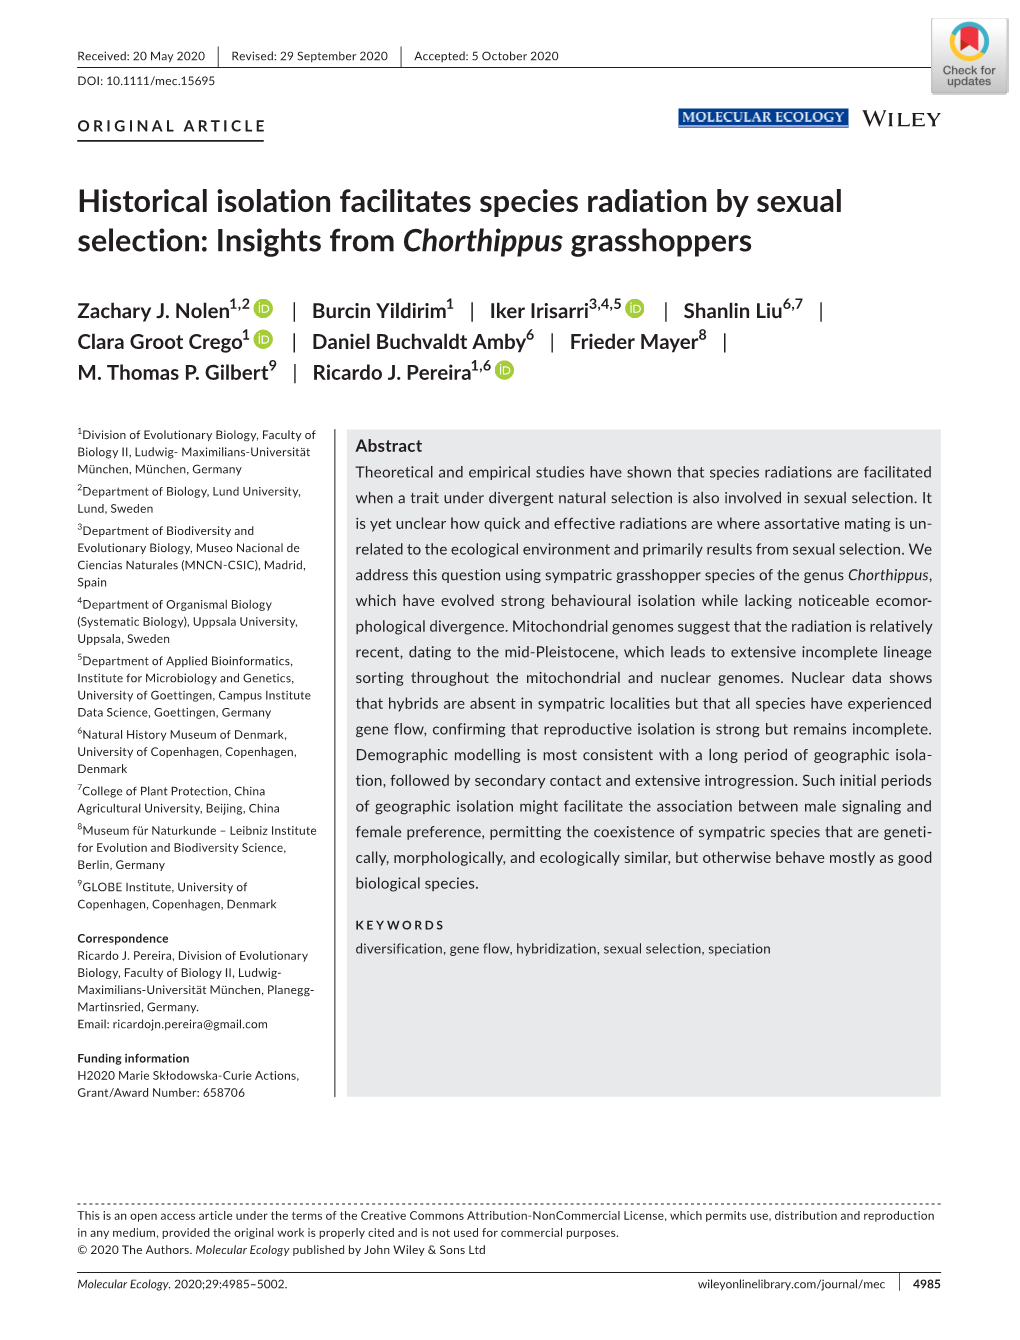 Historical Isolation Facilitates Species Radiation by Sexual Selection: Insights from Chorthippus Grasshoppers